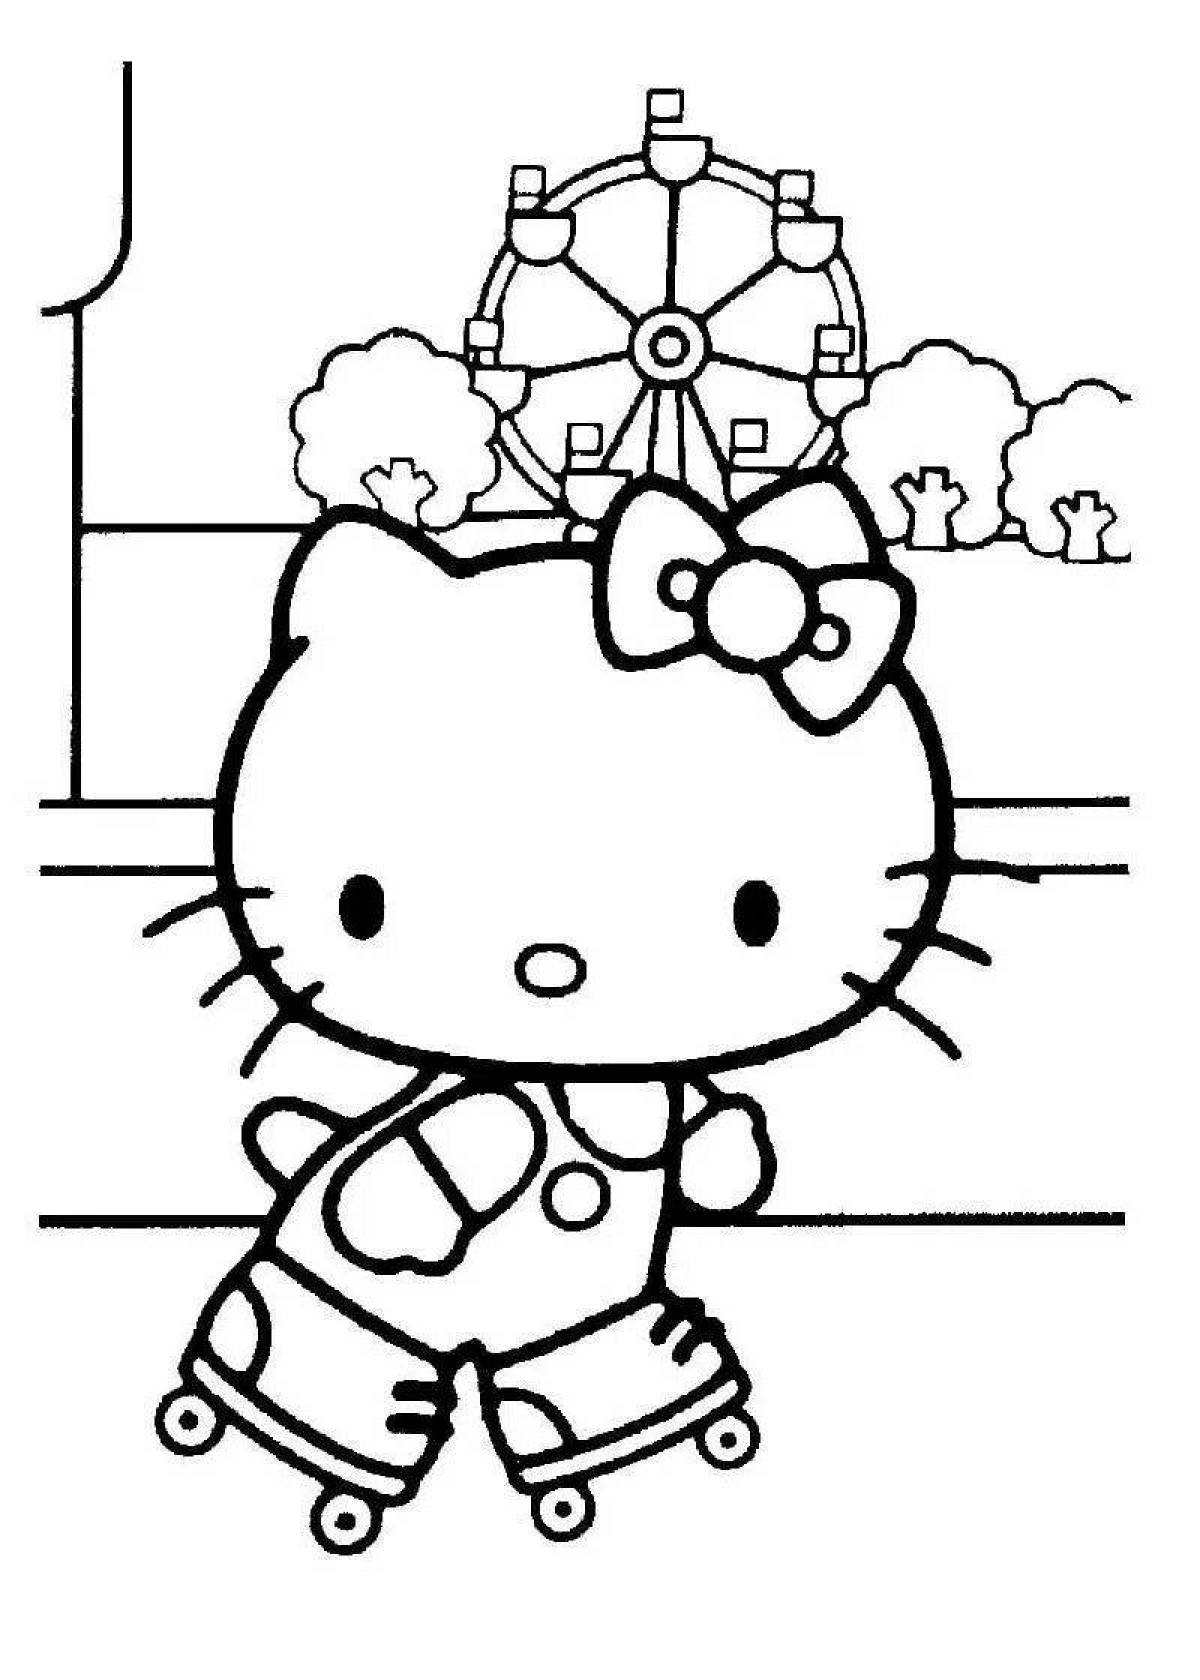 Catie sparkling coloring page